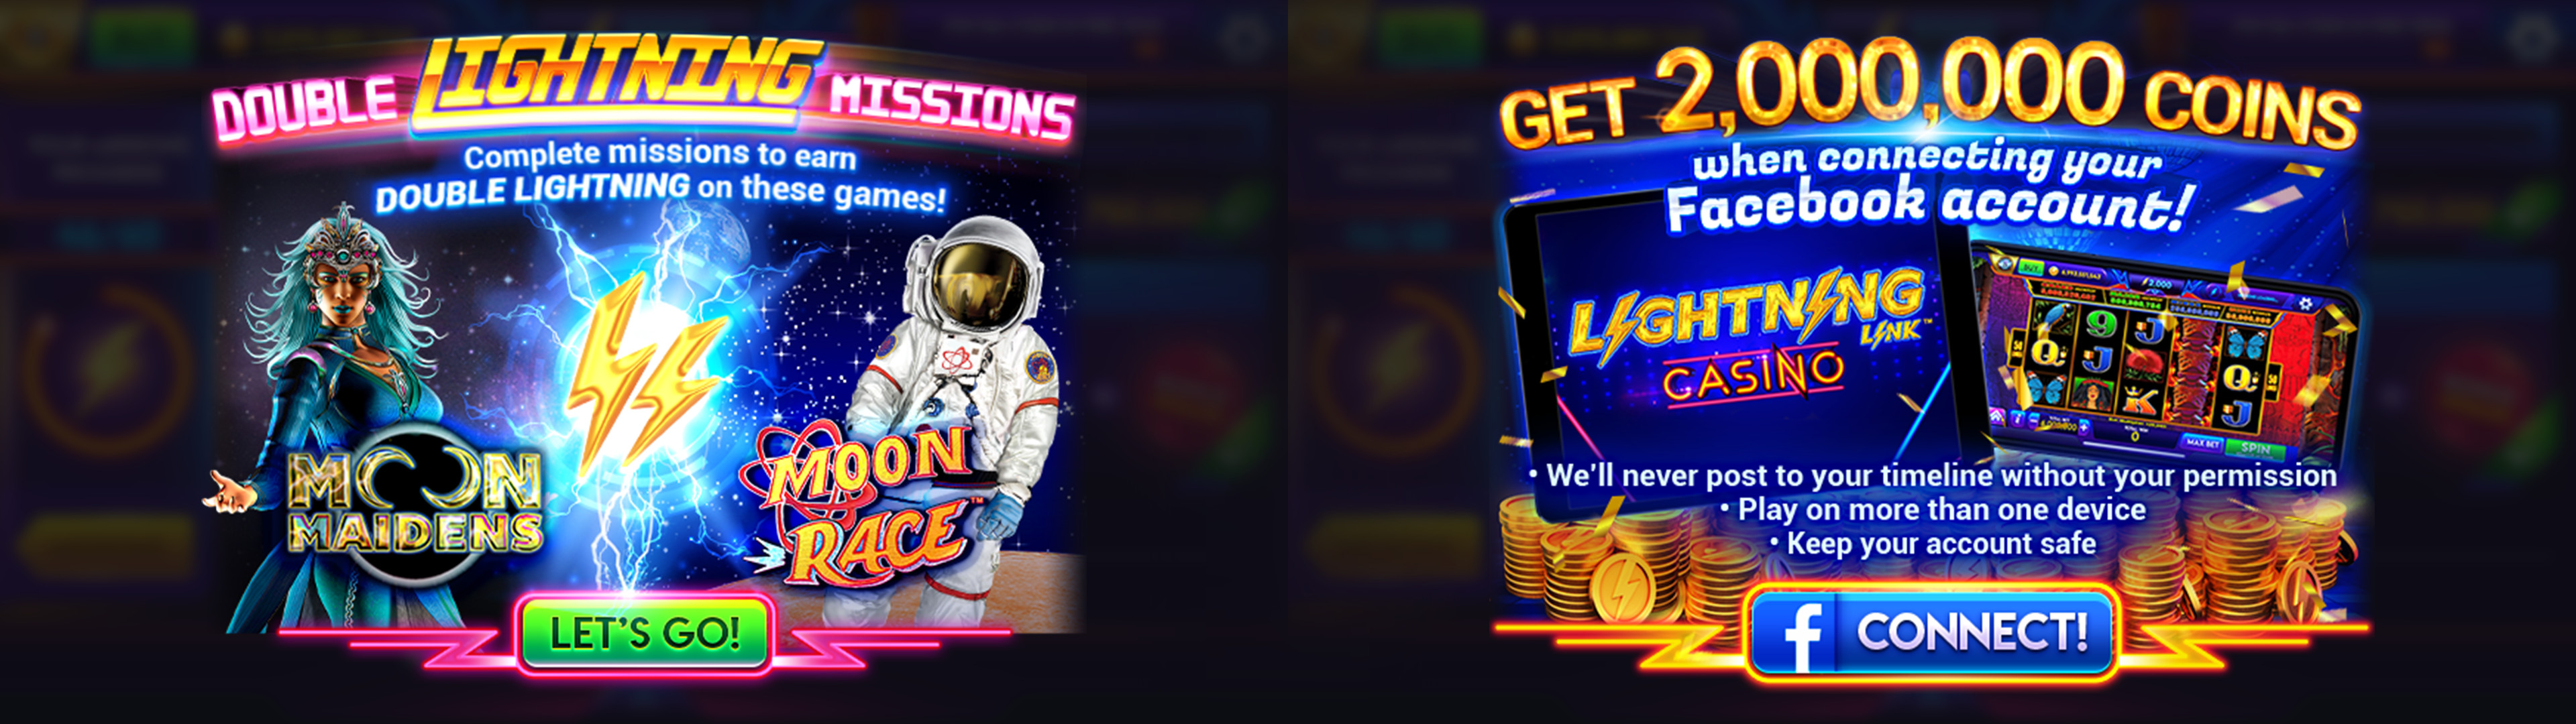 Left: in-game event CRM to promote the metagame of Lightning Link.
Right: educational message to encourage users to link their Facebook account.

Both created with game &amp; season assets and stock images.